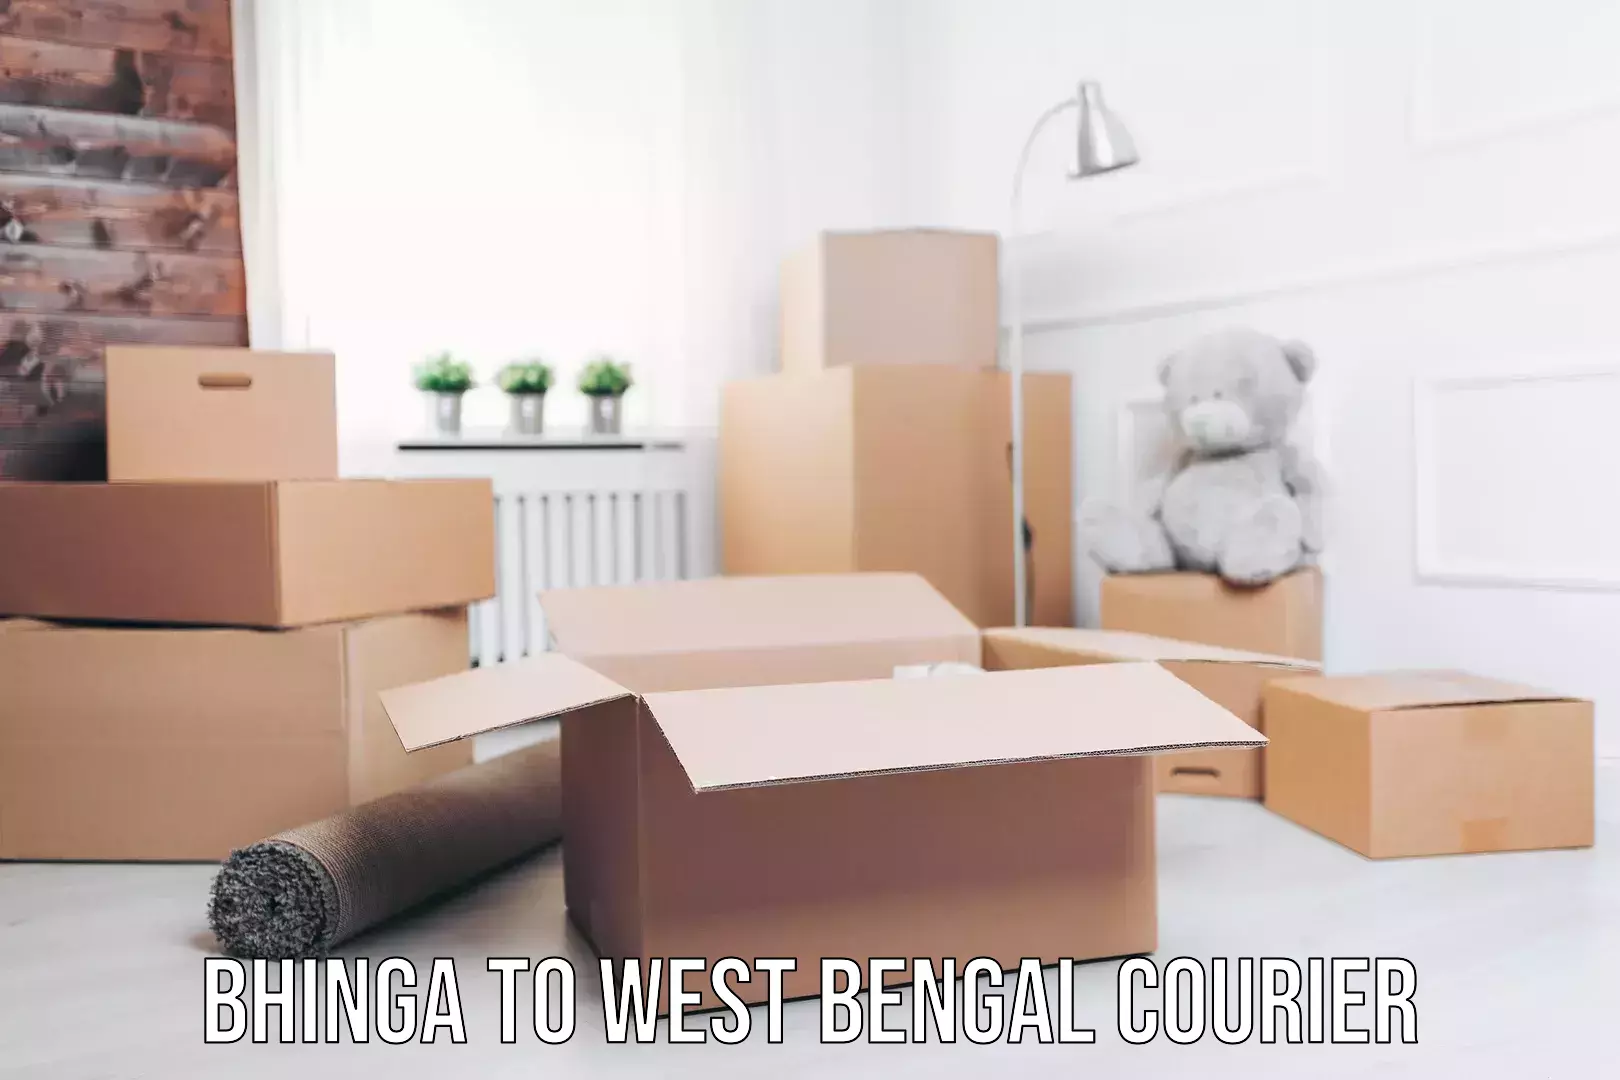 Express delivery capabilities Bhinga to West Bengal